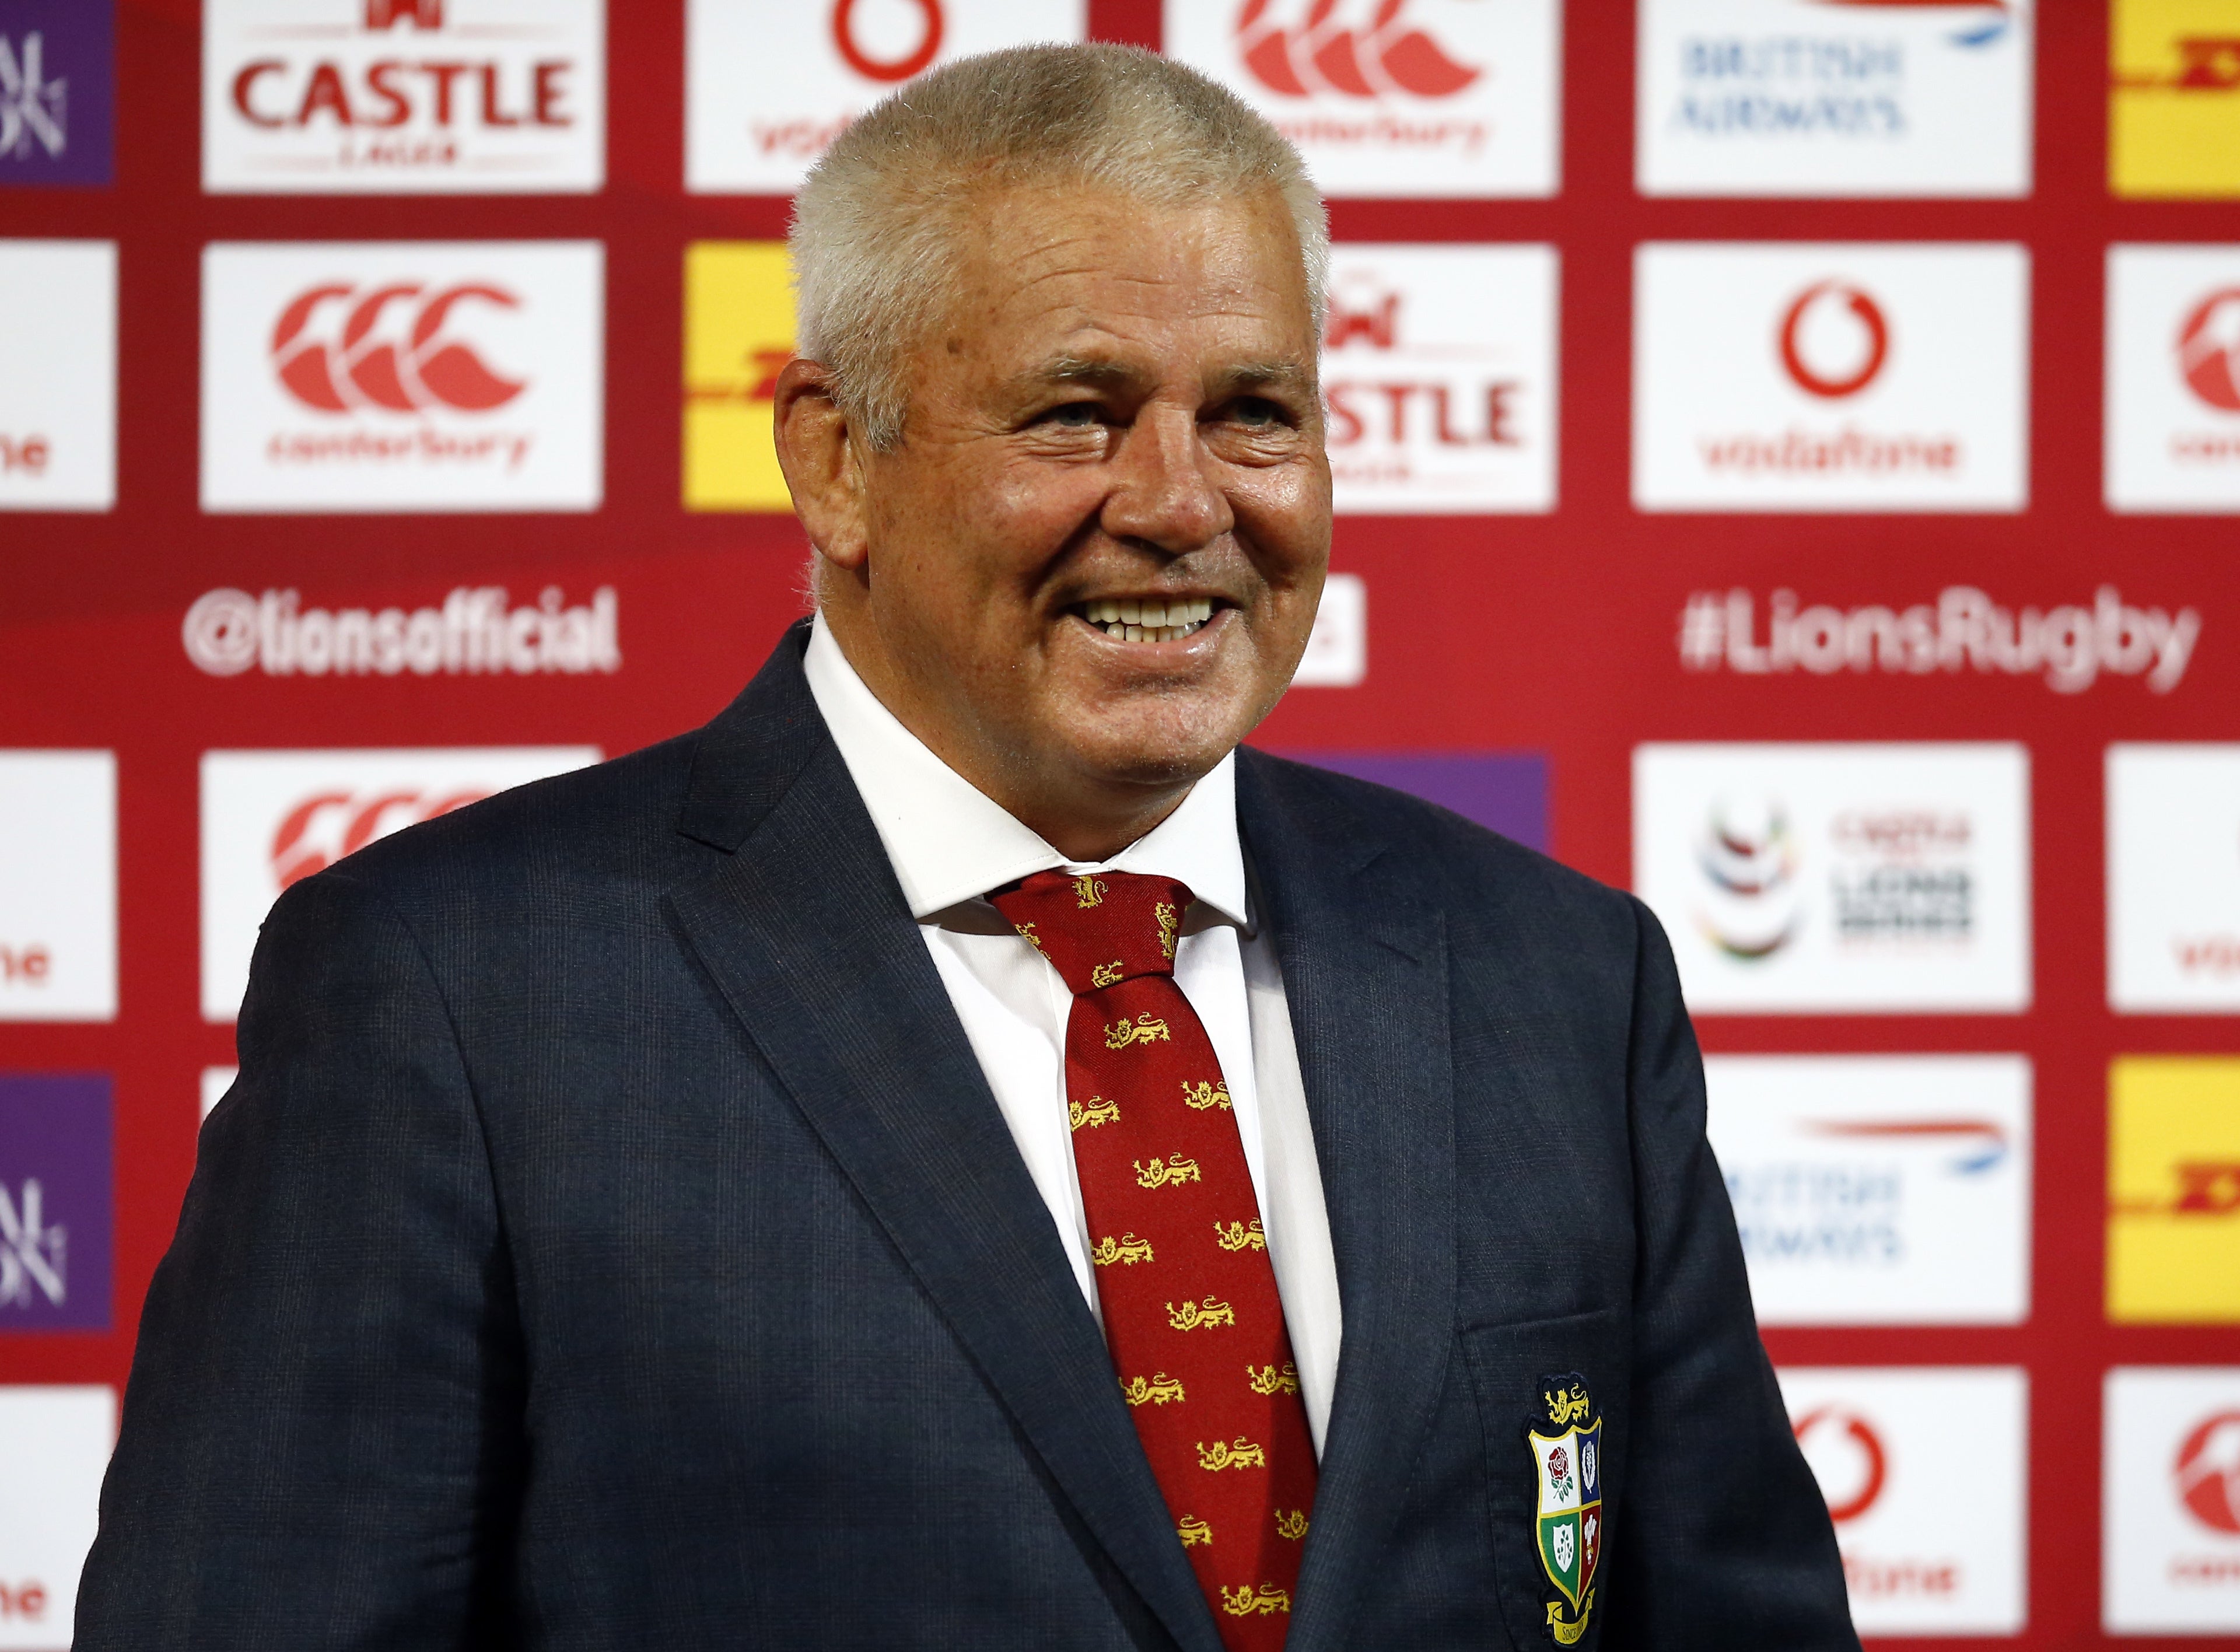 Warren Gatland is convinced the Lions' Test series against South Africa will take place